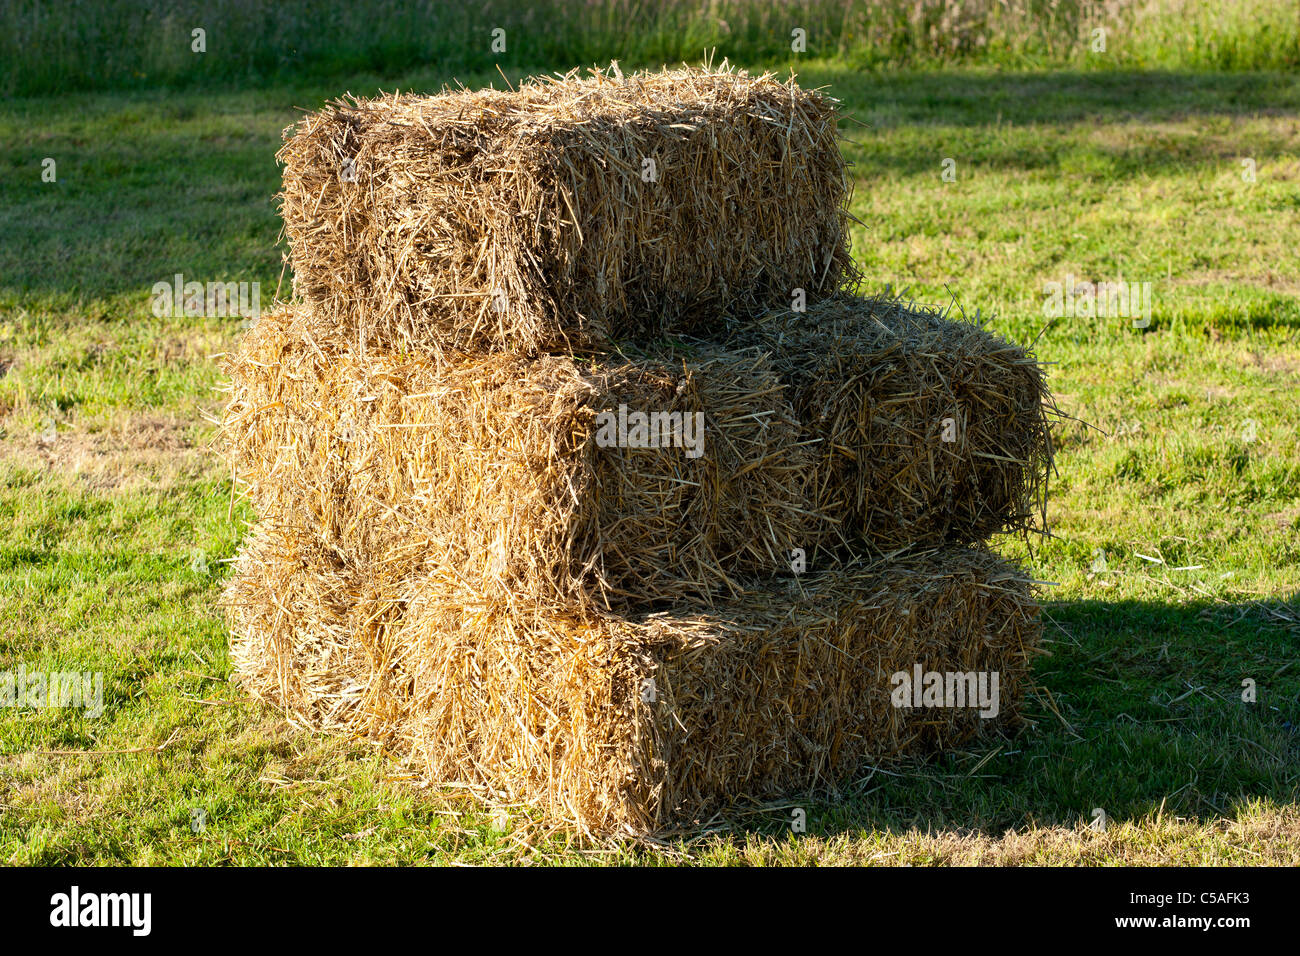 Straw bales in a small stack Stock Photo